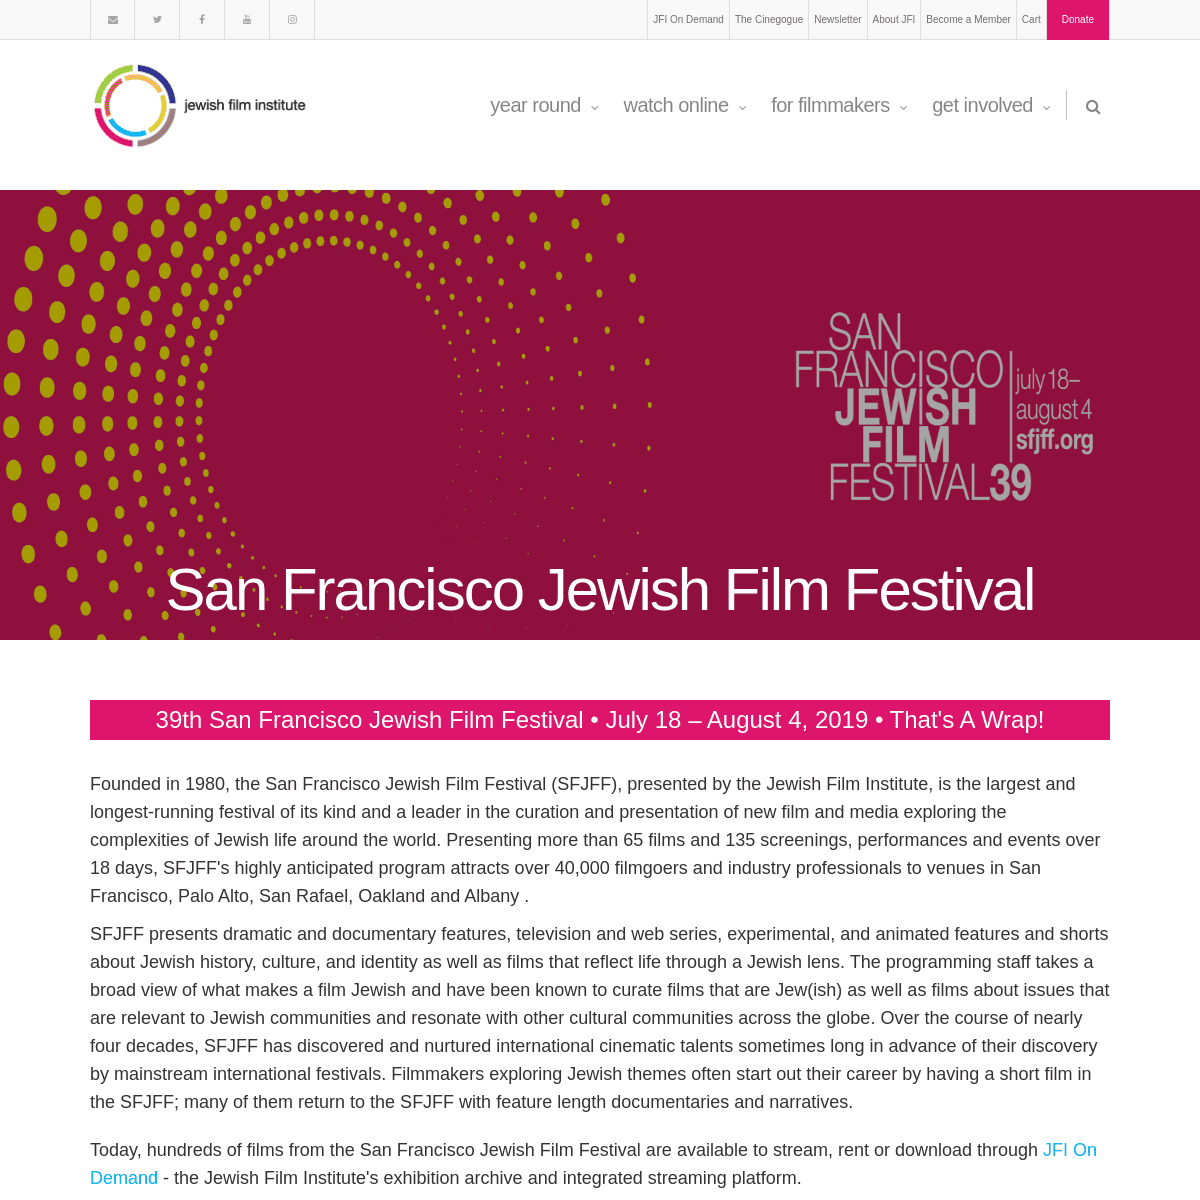 A complete backup of sfjff.org